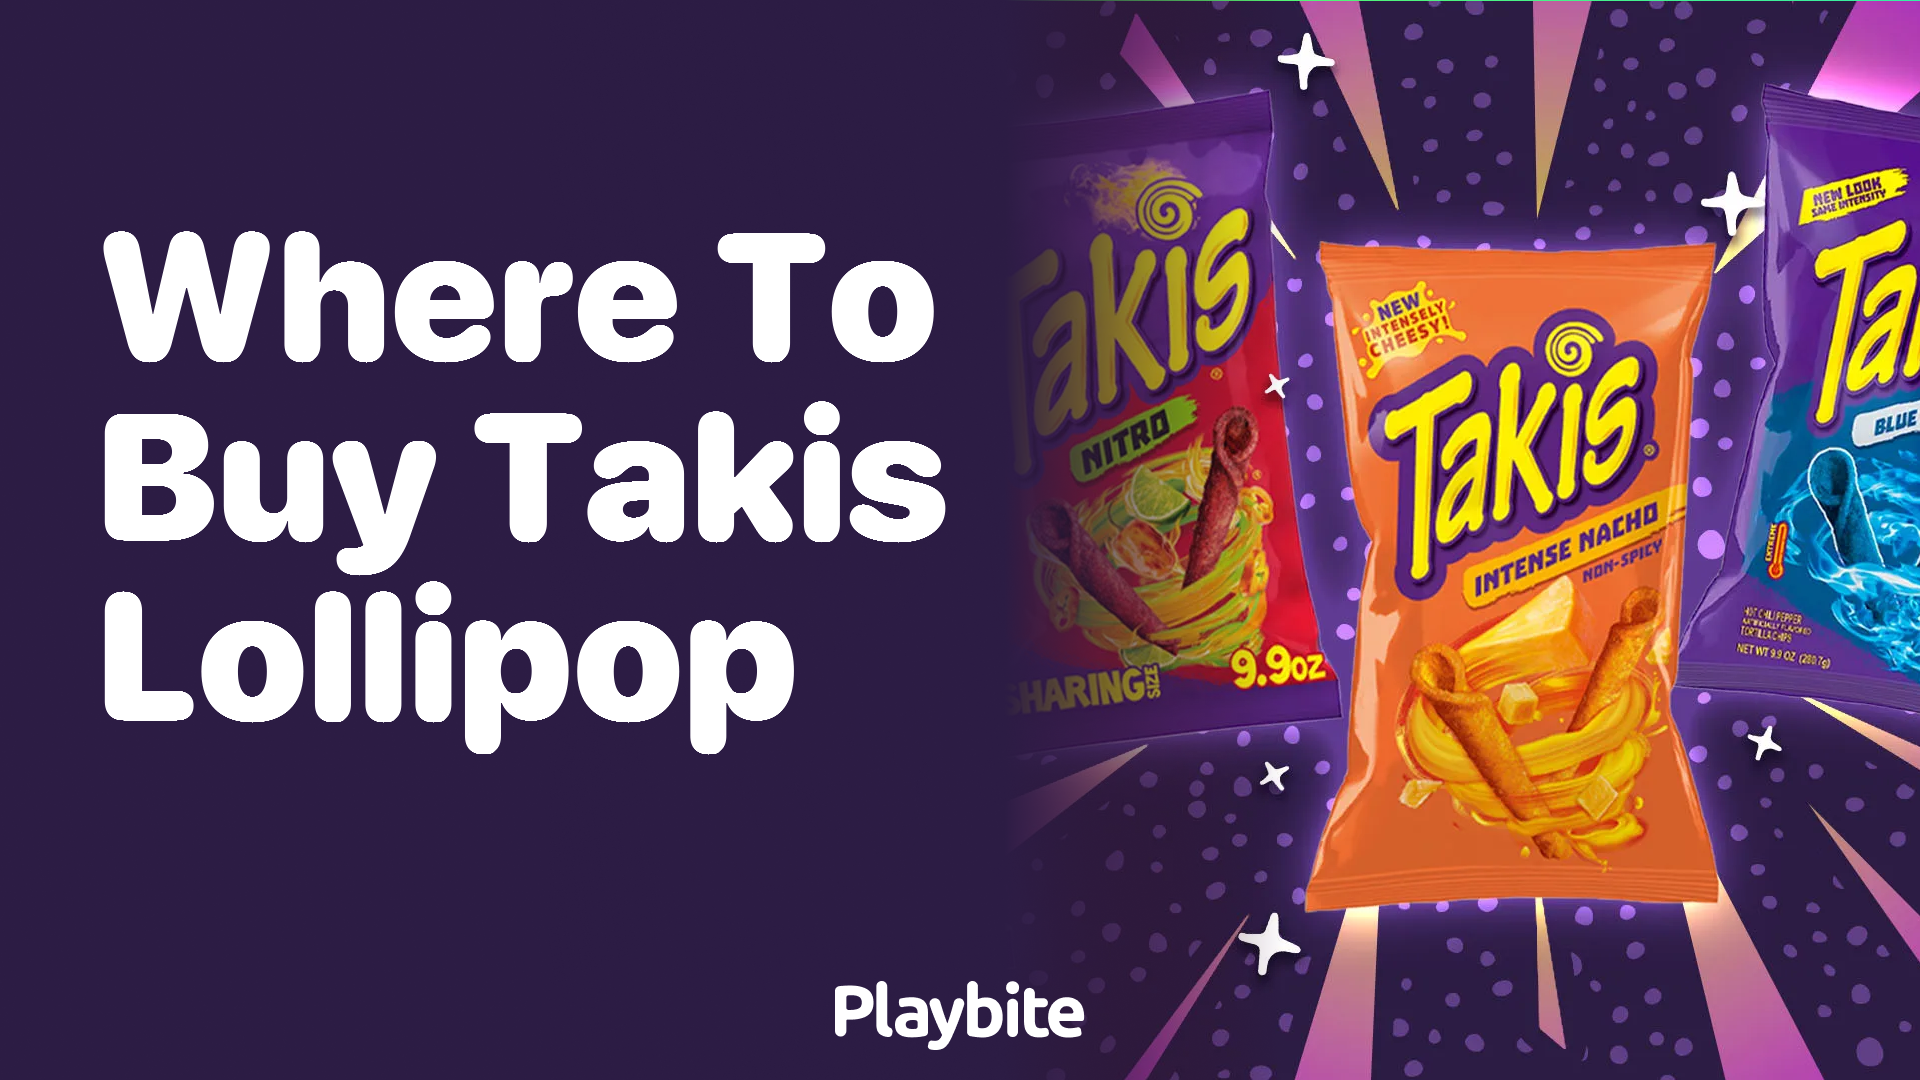 Where to Buy Takis Lollipop? Find Out Here!